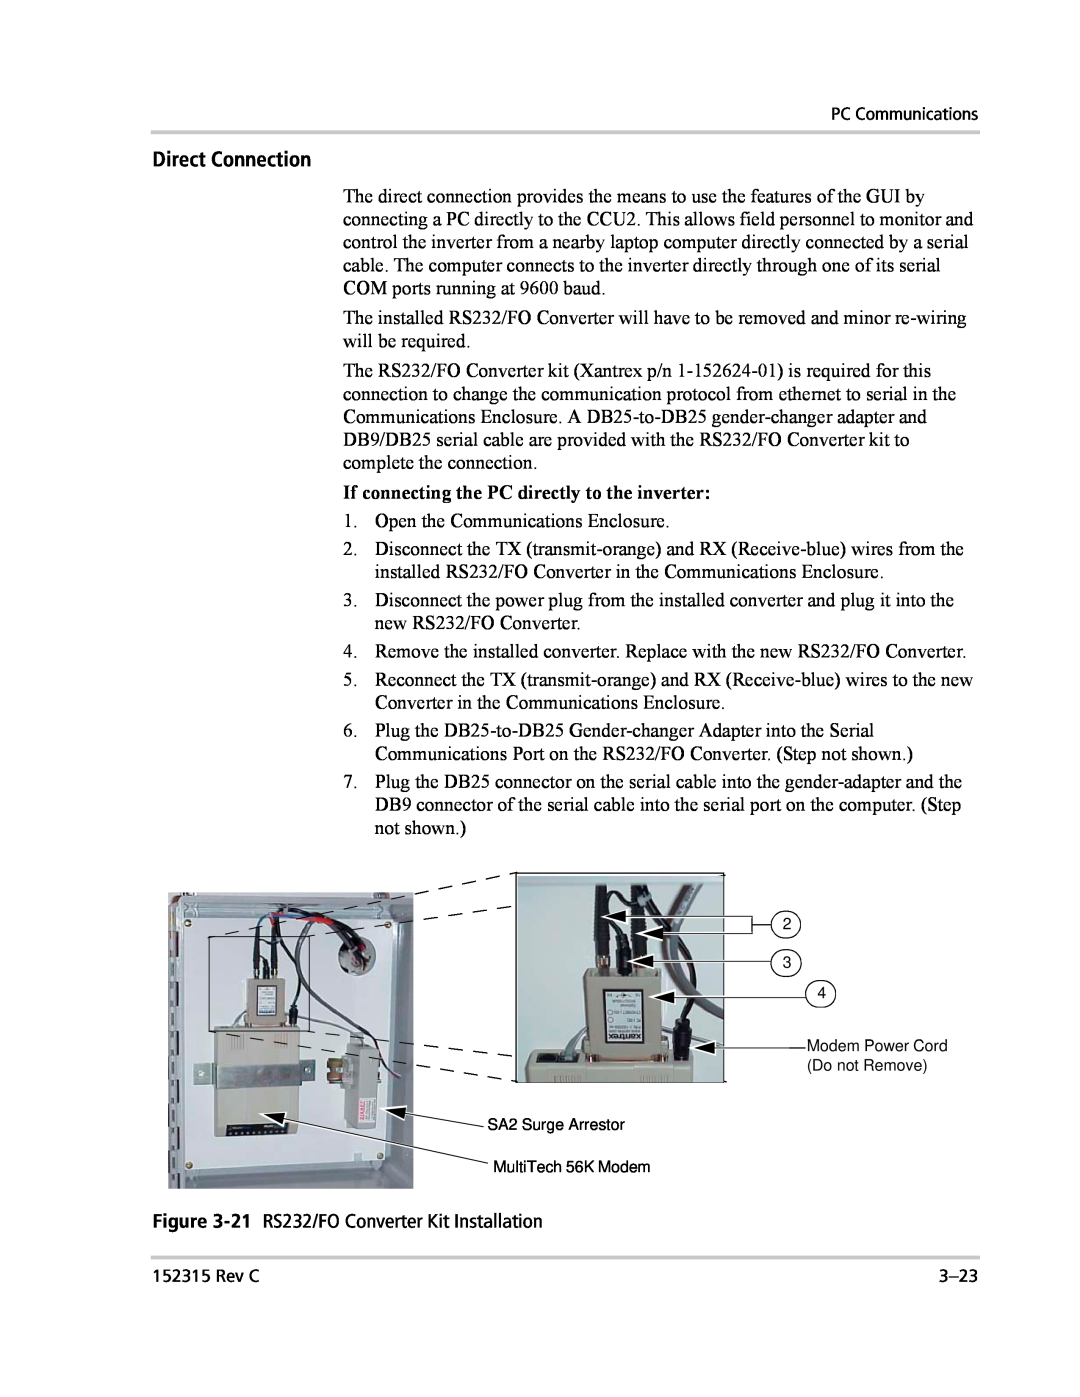 Xantrex Technology PV100S-480 installation manual Direct Connection, If connecting the PC directly to the inverter 